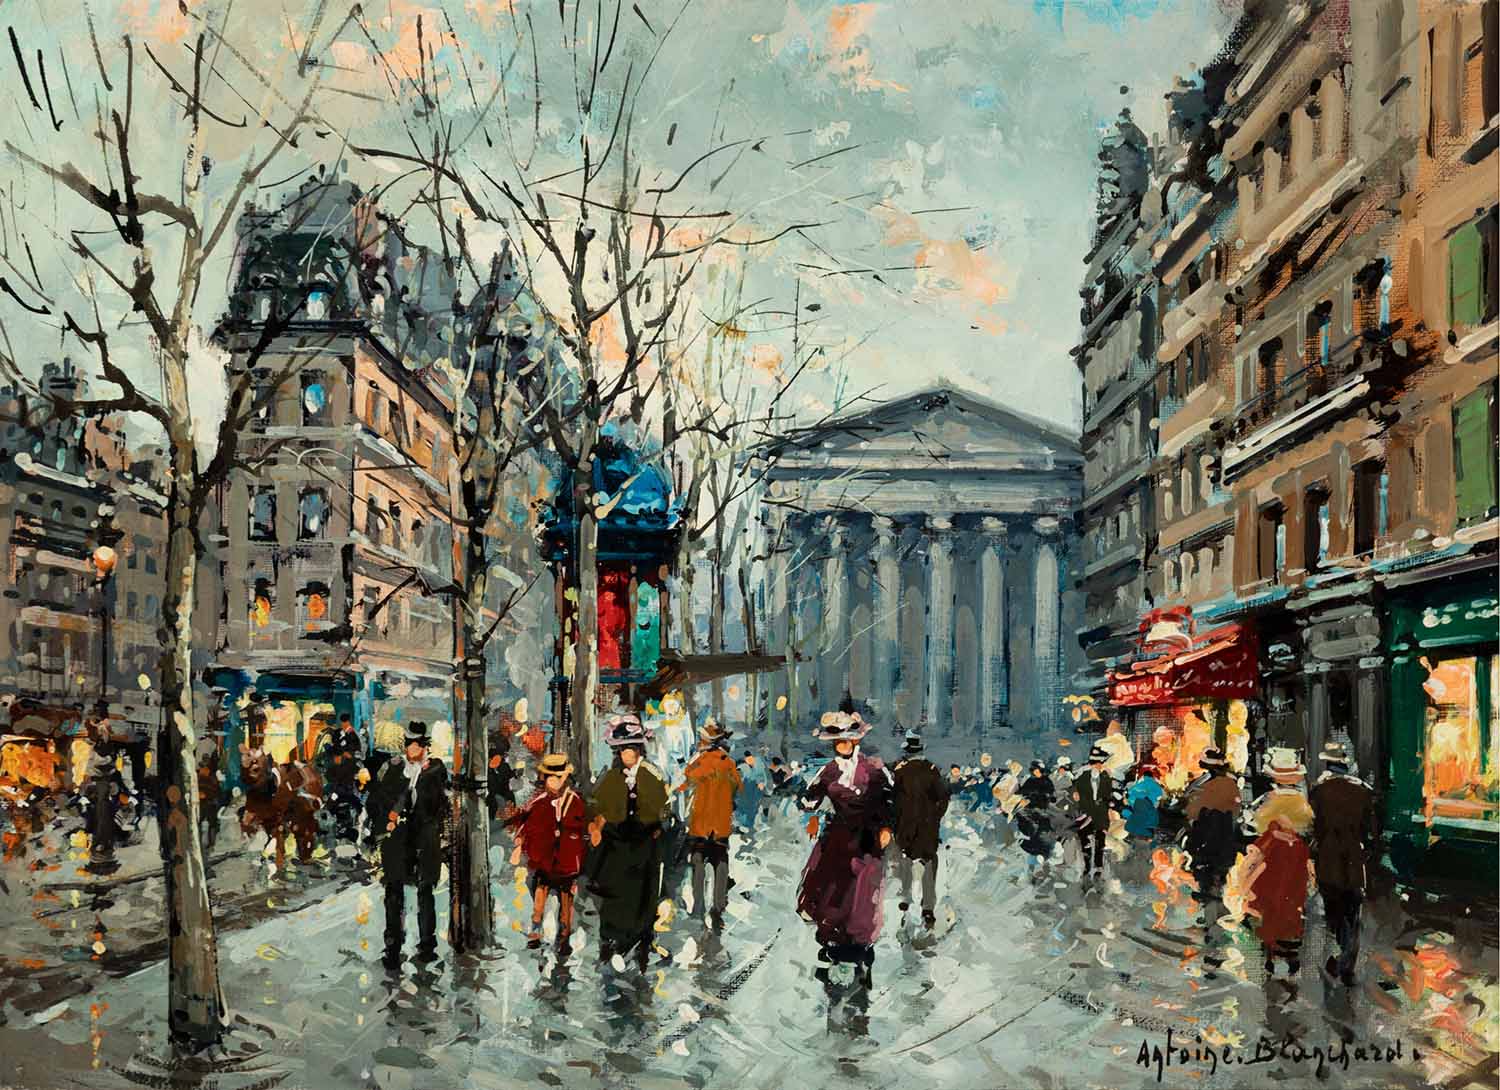 a view of the Madeleine in paris from Rue Tronchet with people walking in the street